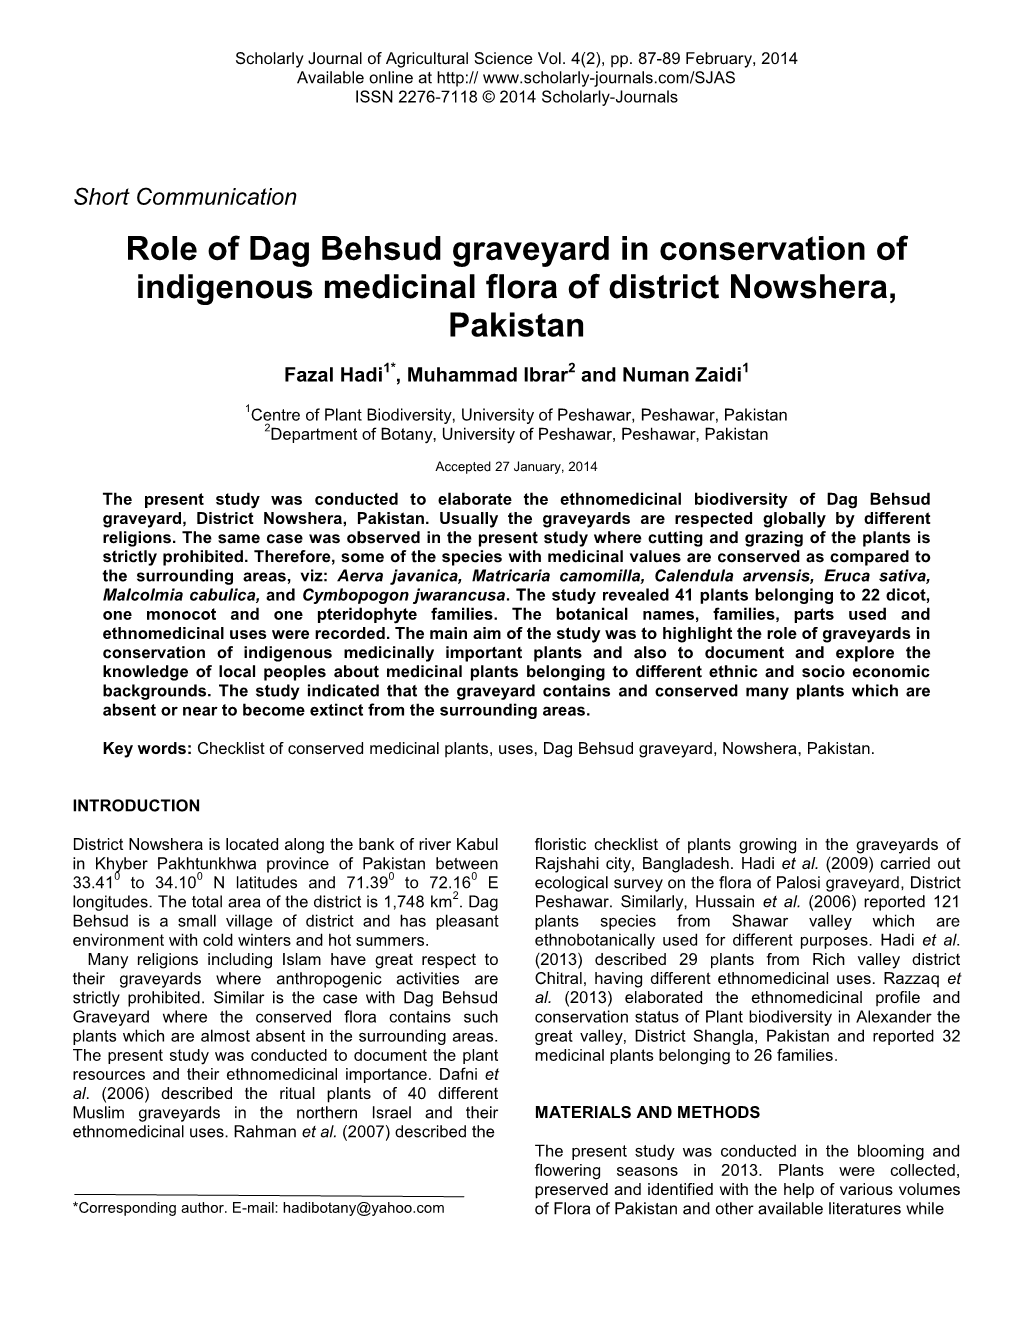 Role of Dag Behsud Graveyard in Conservation of Indigenous Medicinal Flora of District Nowshera, Pakistan